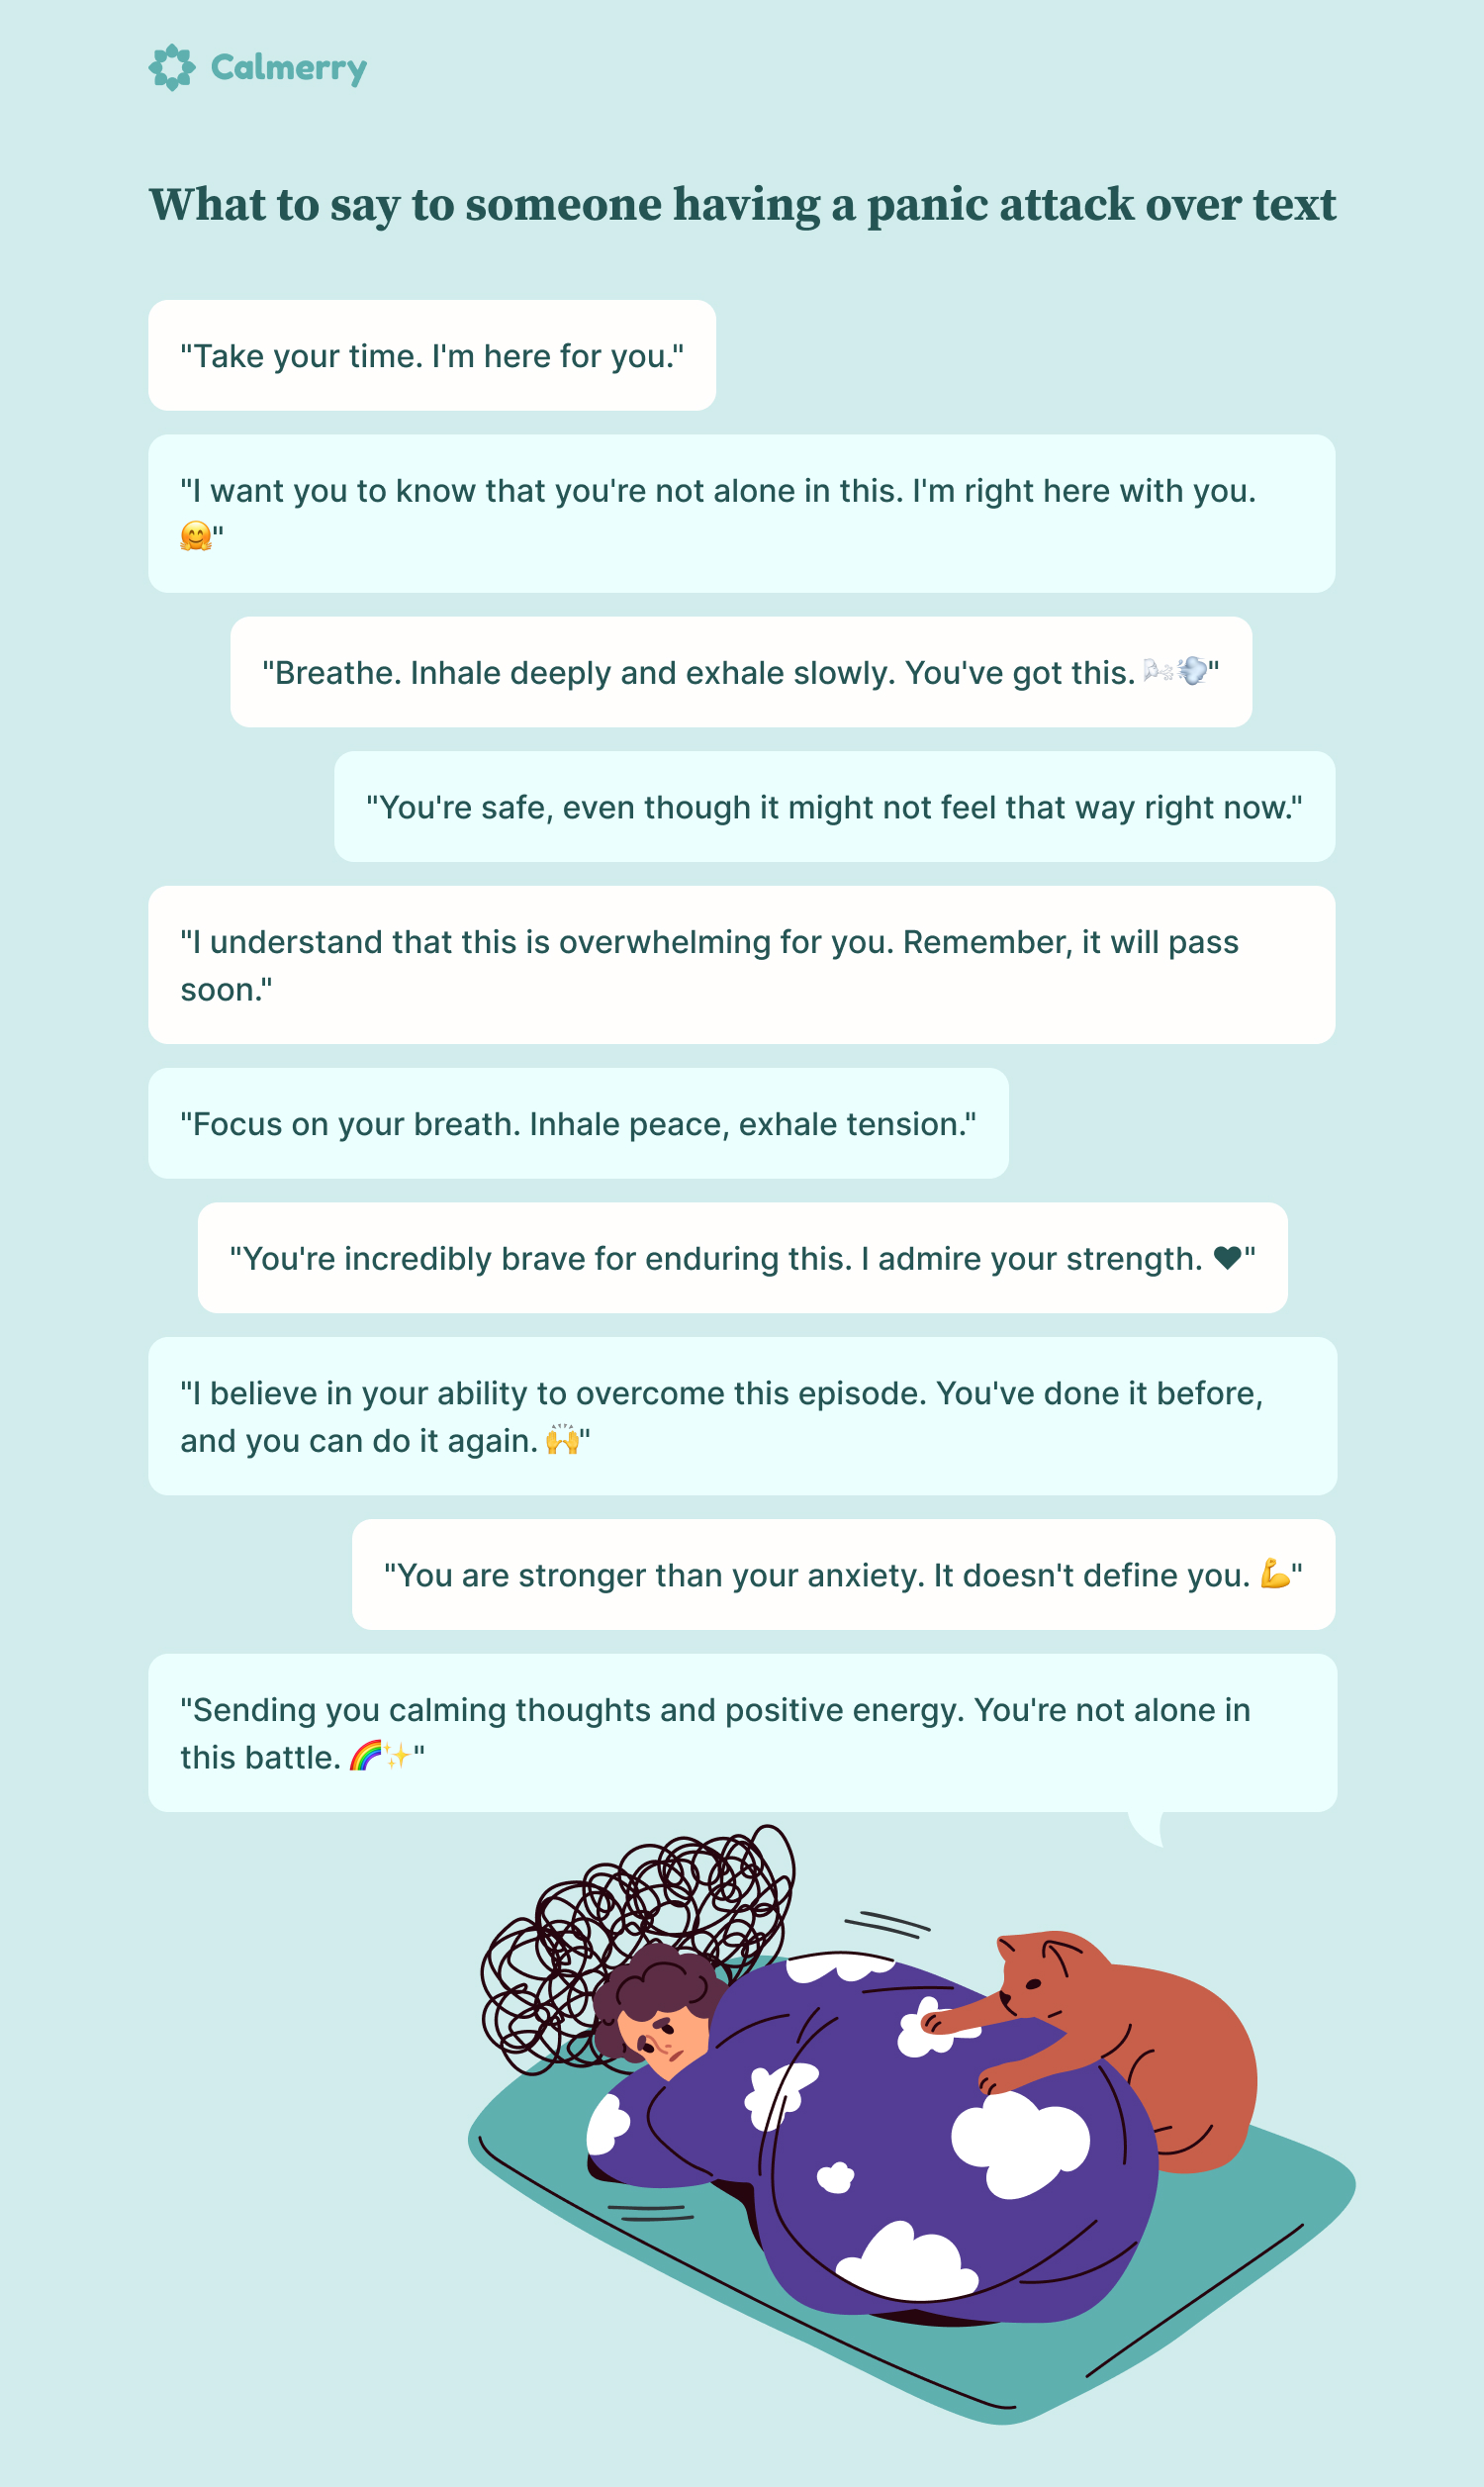 What to say to someone having a panic attack over text "Take your time. I'm here for you." "I want you to know that you're not alone in this. I'm right here with you. 🤗" "Breathe. Inhale deeply and exhale slowly. You've got this. 🌬️💨" "You're safe, even though it might not feel that way right now." "I understand that this is overwhelming for you. Remember, it will pass soon." "Focus on your breath. Inhale peace, exhale tension." "You're incredibly brave for enduring this. I admire your strength. ❤️" "I believe in your ability to overcome this episode. You've done it before, and you can do it again. 🙌" "You are stronger than your anxiety. It doesn't define you. 💪" "Sending you calming thoughts and positive energy. You're not alone in this battle. 🌈✨"